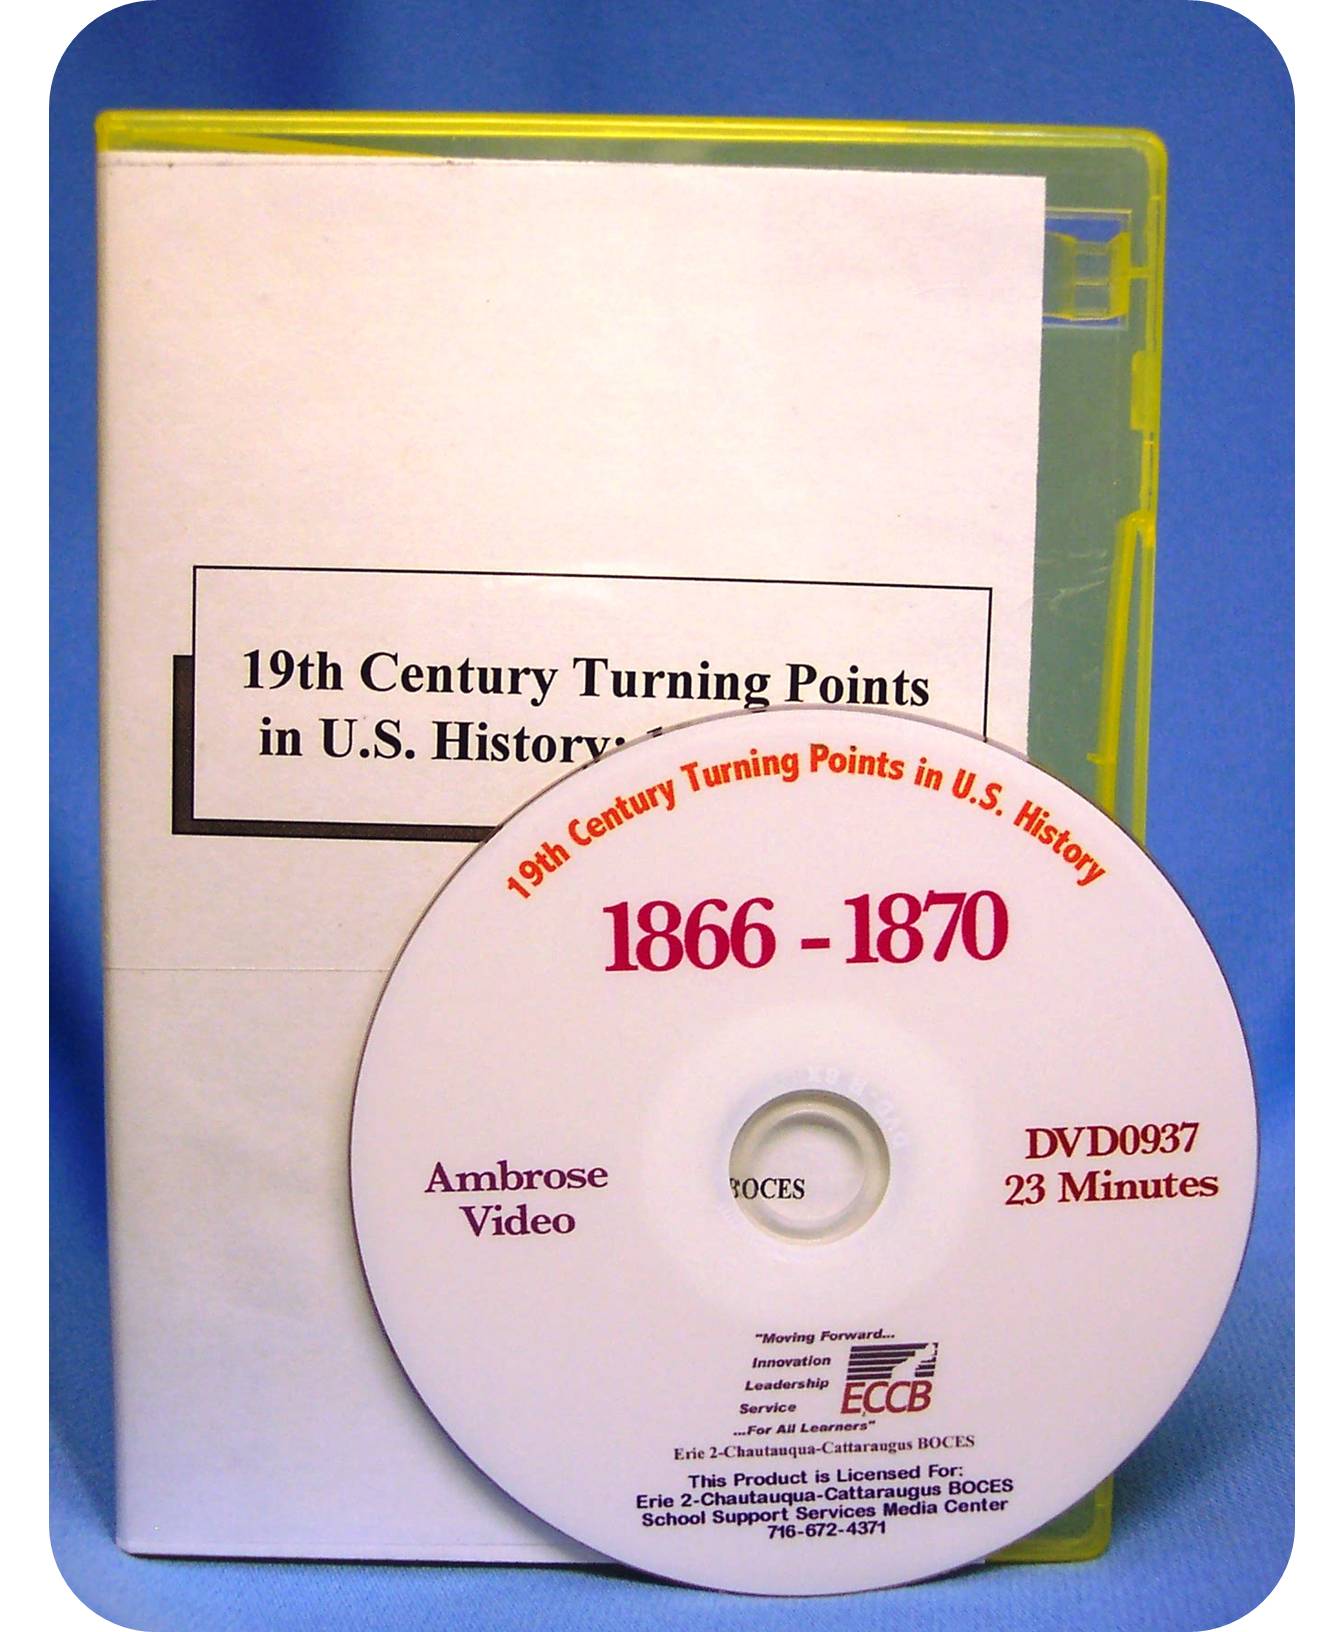 19th Century Turning Points in U.S. History: 1866 - 1870